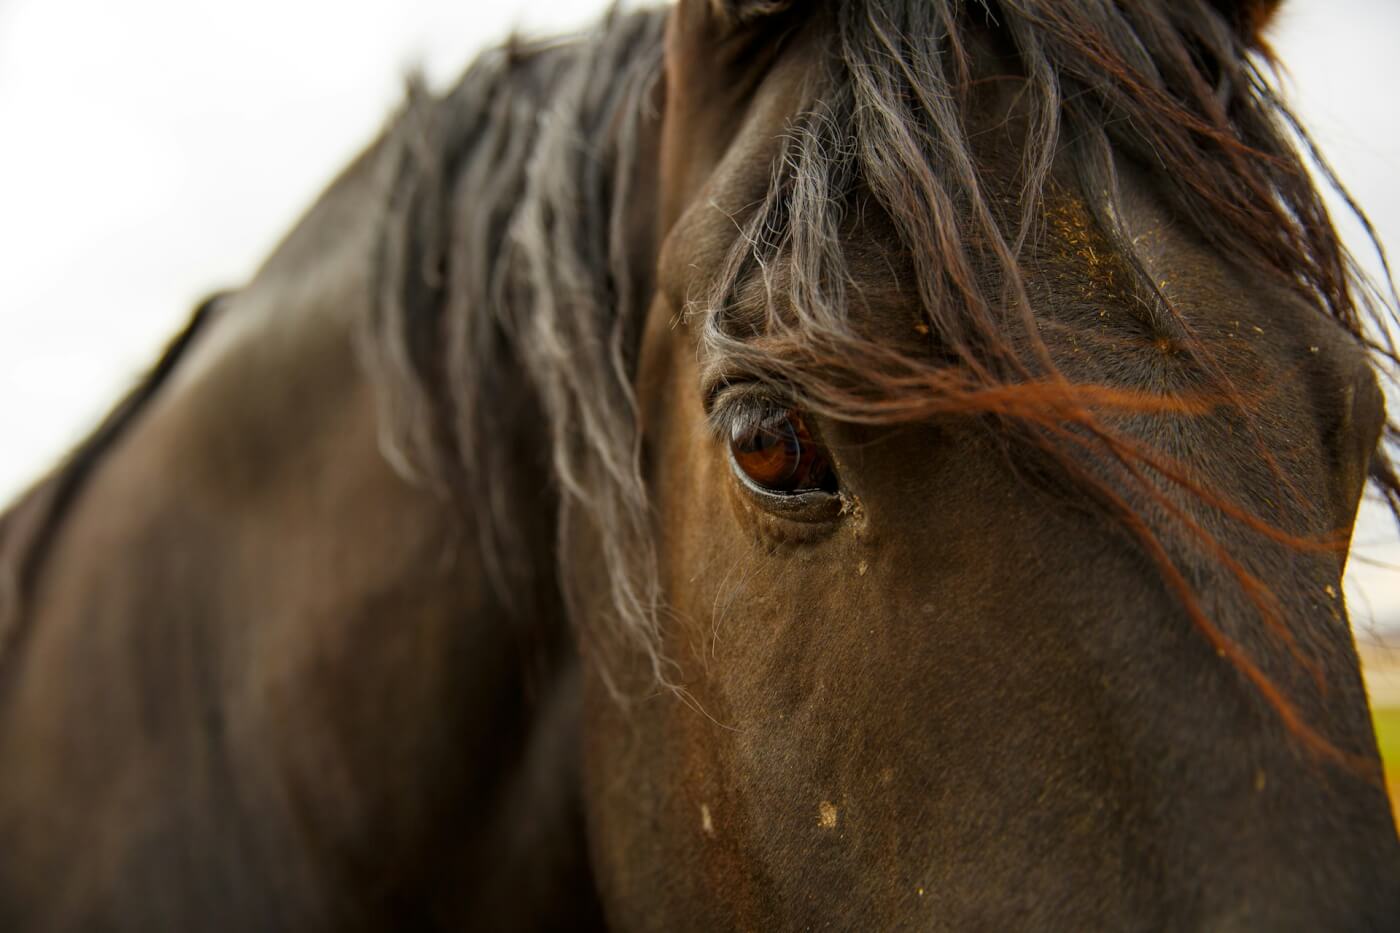 johnny mcclung SjZ5hJ9H7qs unsplash Urge Wisconsin Officials to Help a Downed Horse!